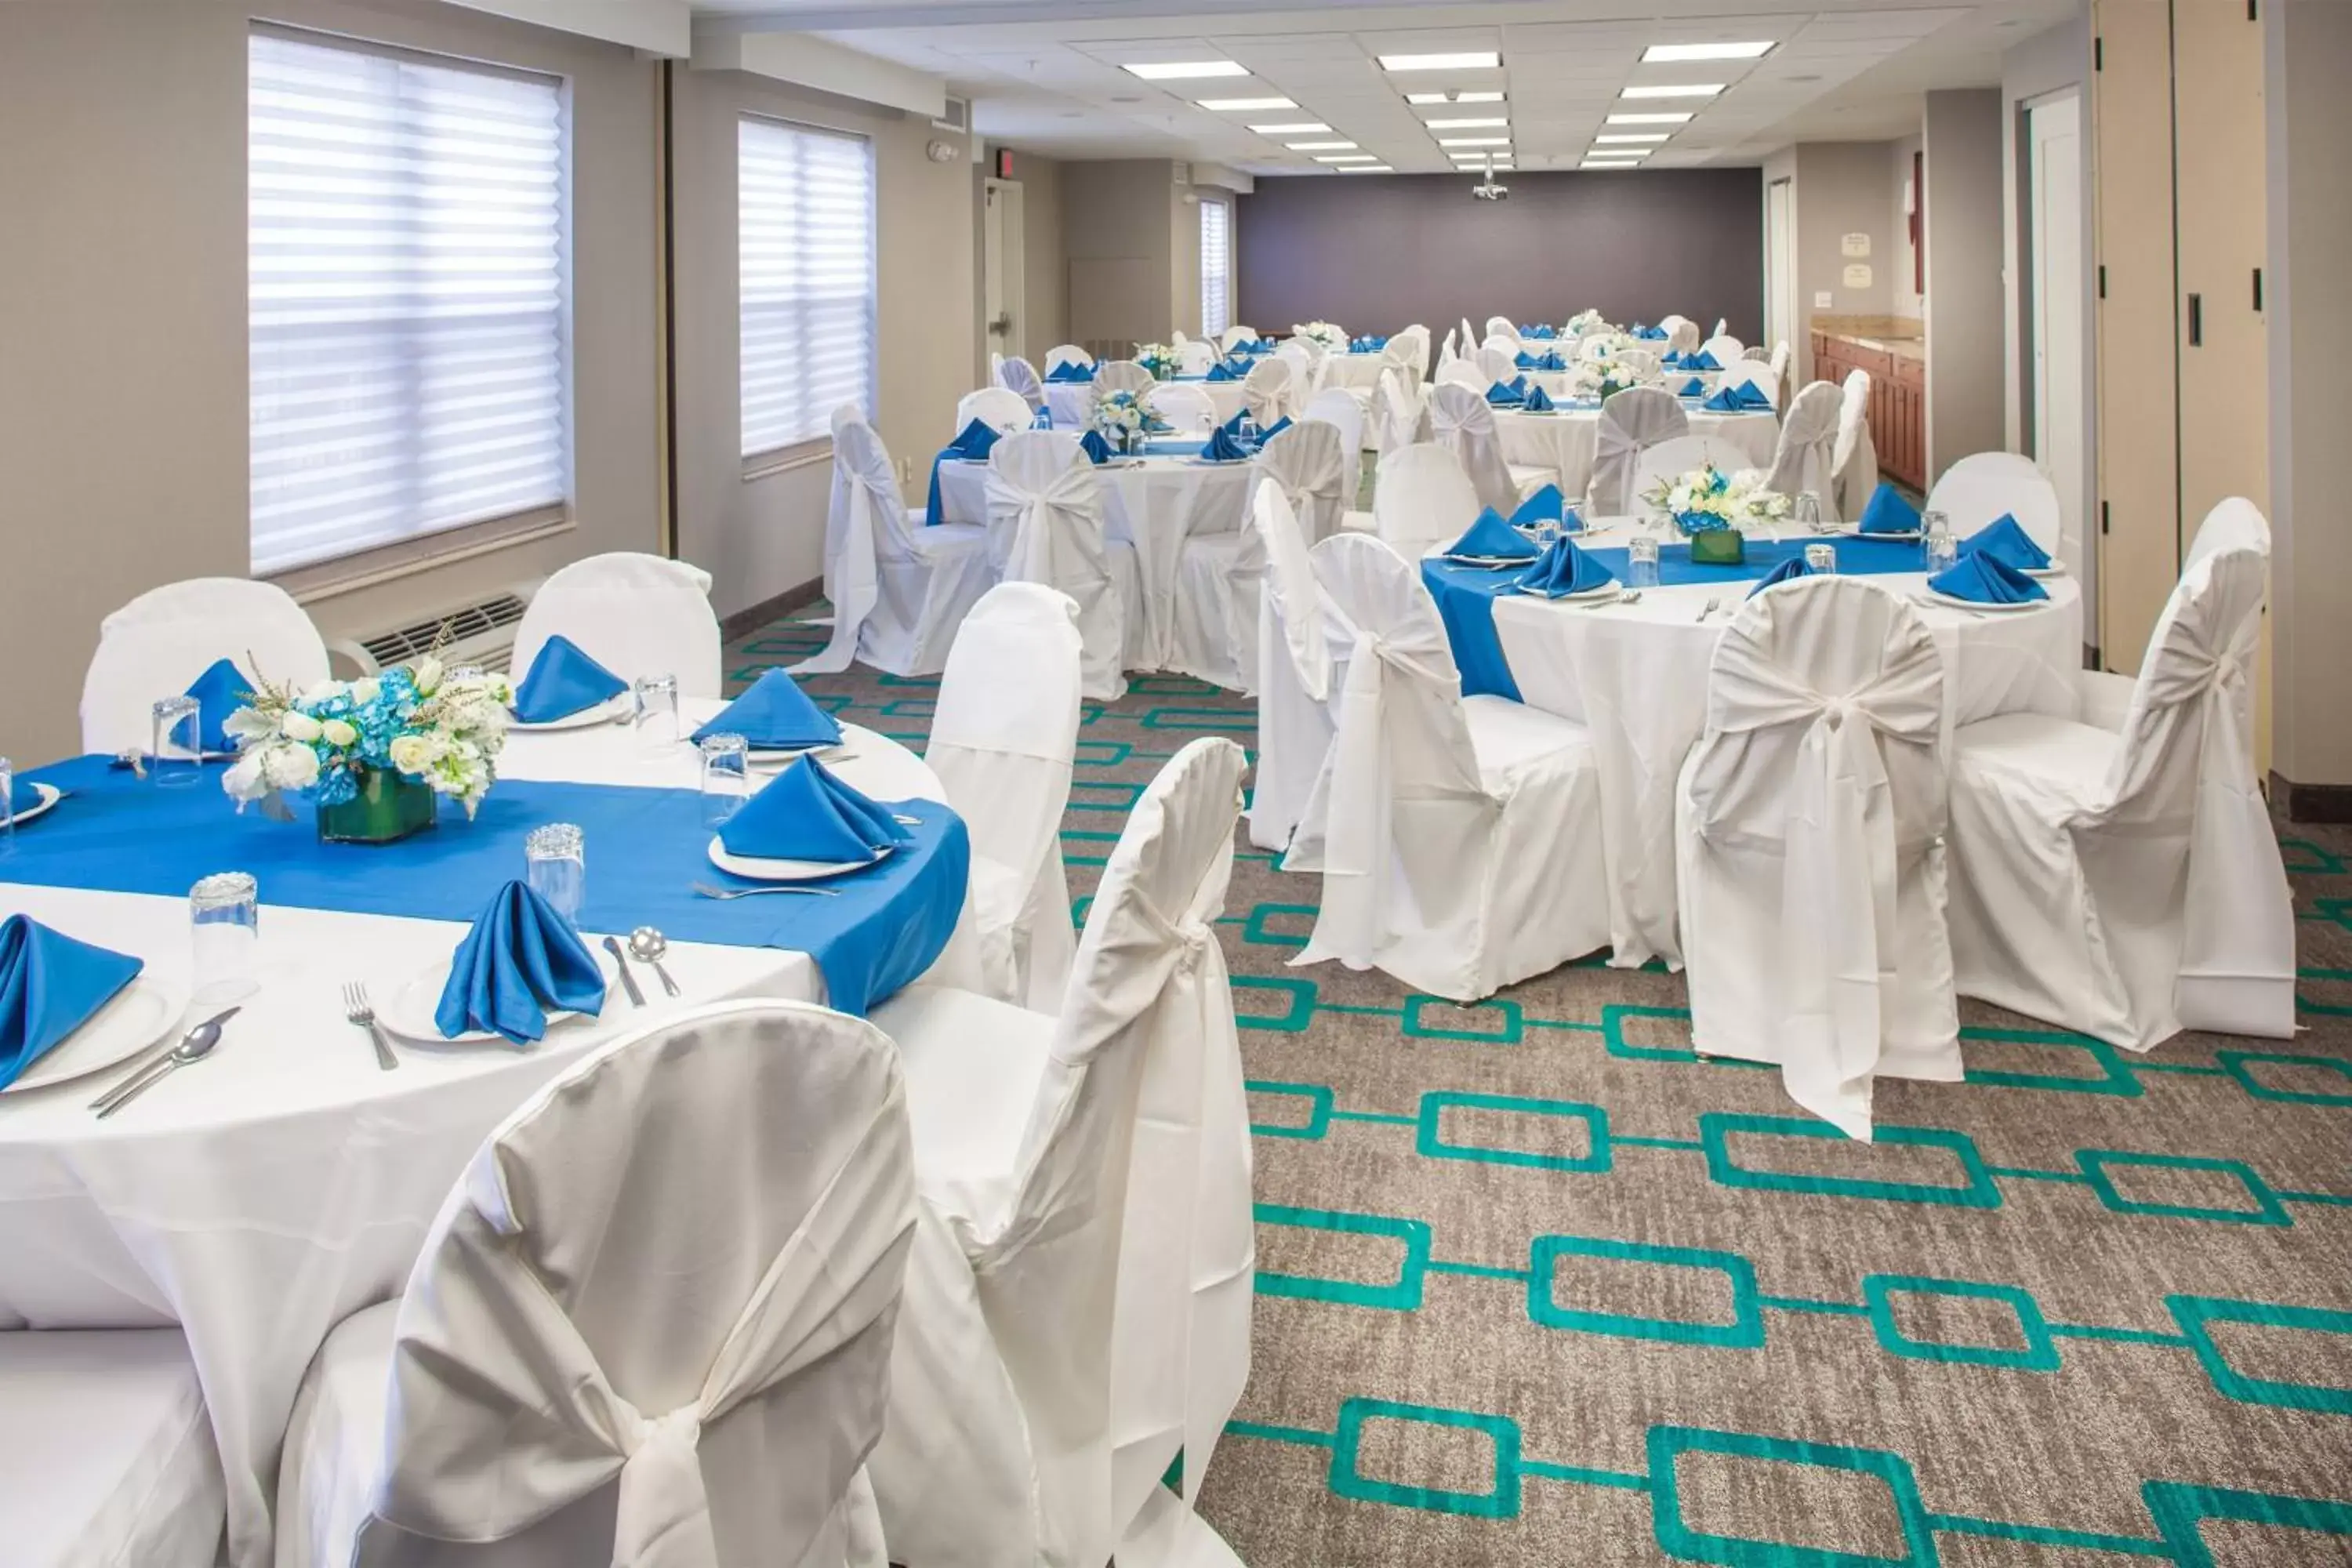 Meeting/conference room, Banquet Facilities in Residence Inn Prescott